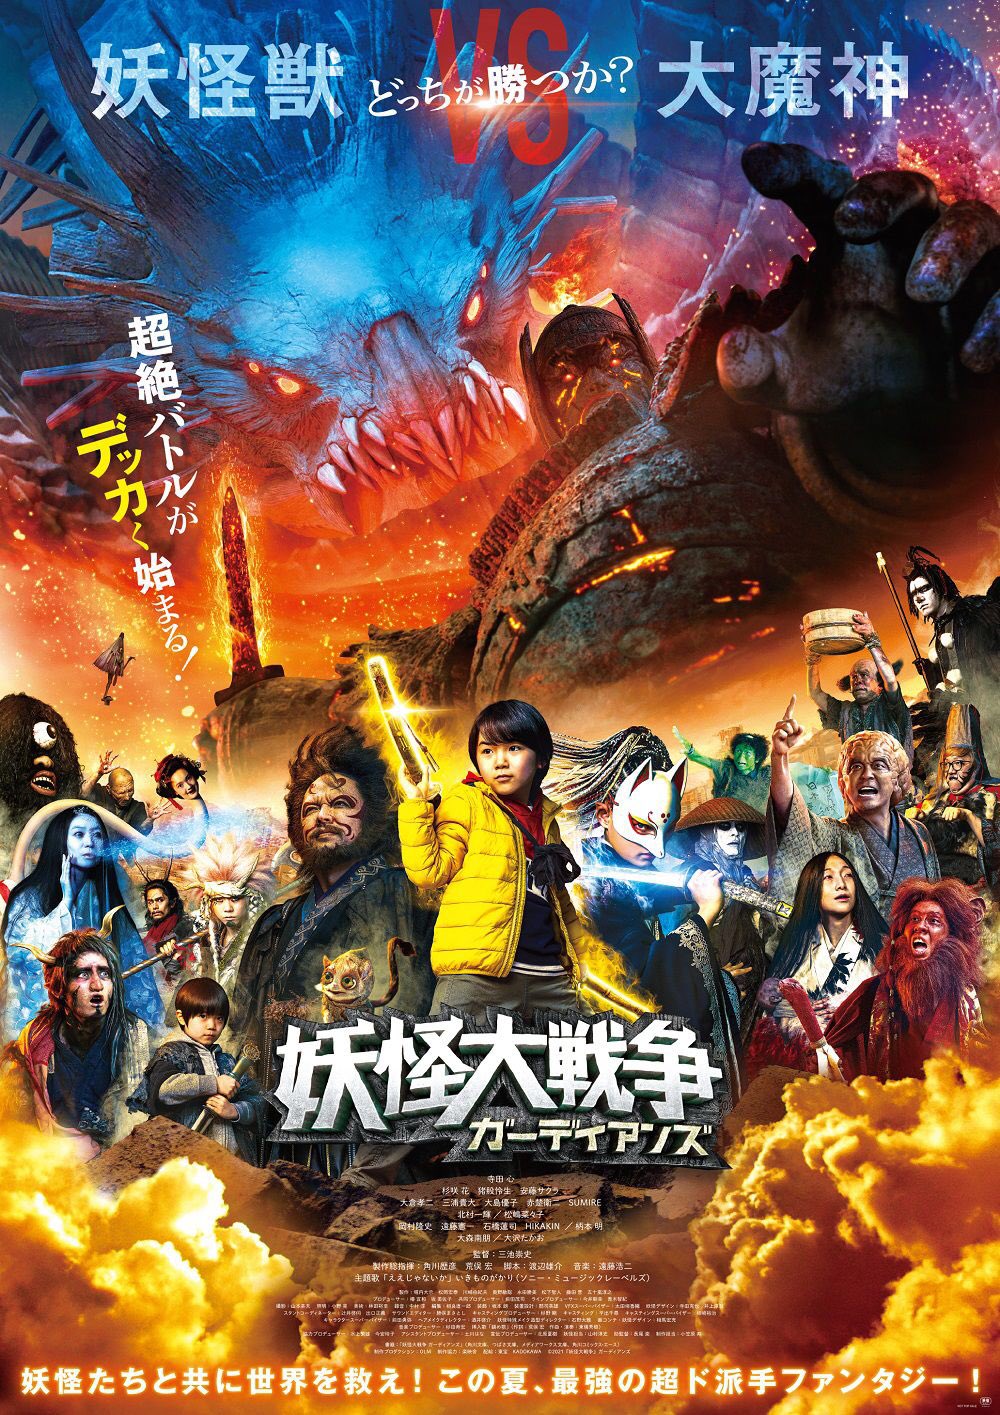 Main trailer & poster for movie “The Great Yokai War: Guardians